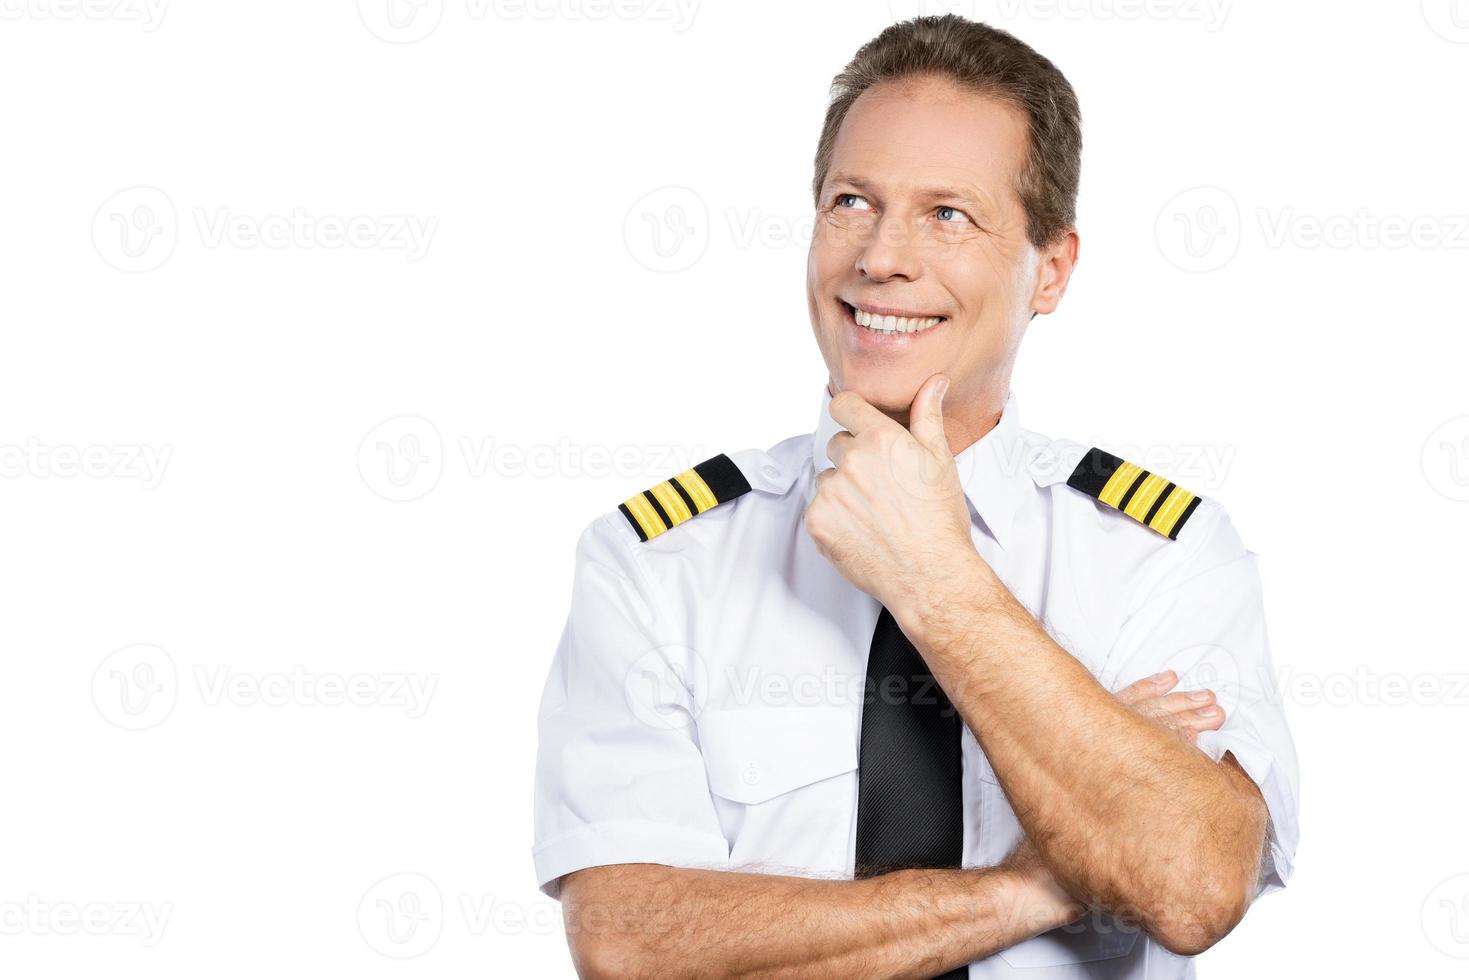 Passionate about sky. Thoughtful male pilot in uniform holding hand on chin and looking up with smile while standing against white background photo